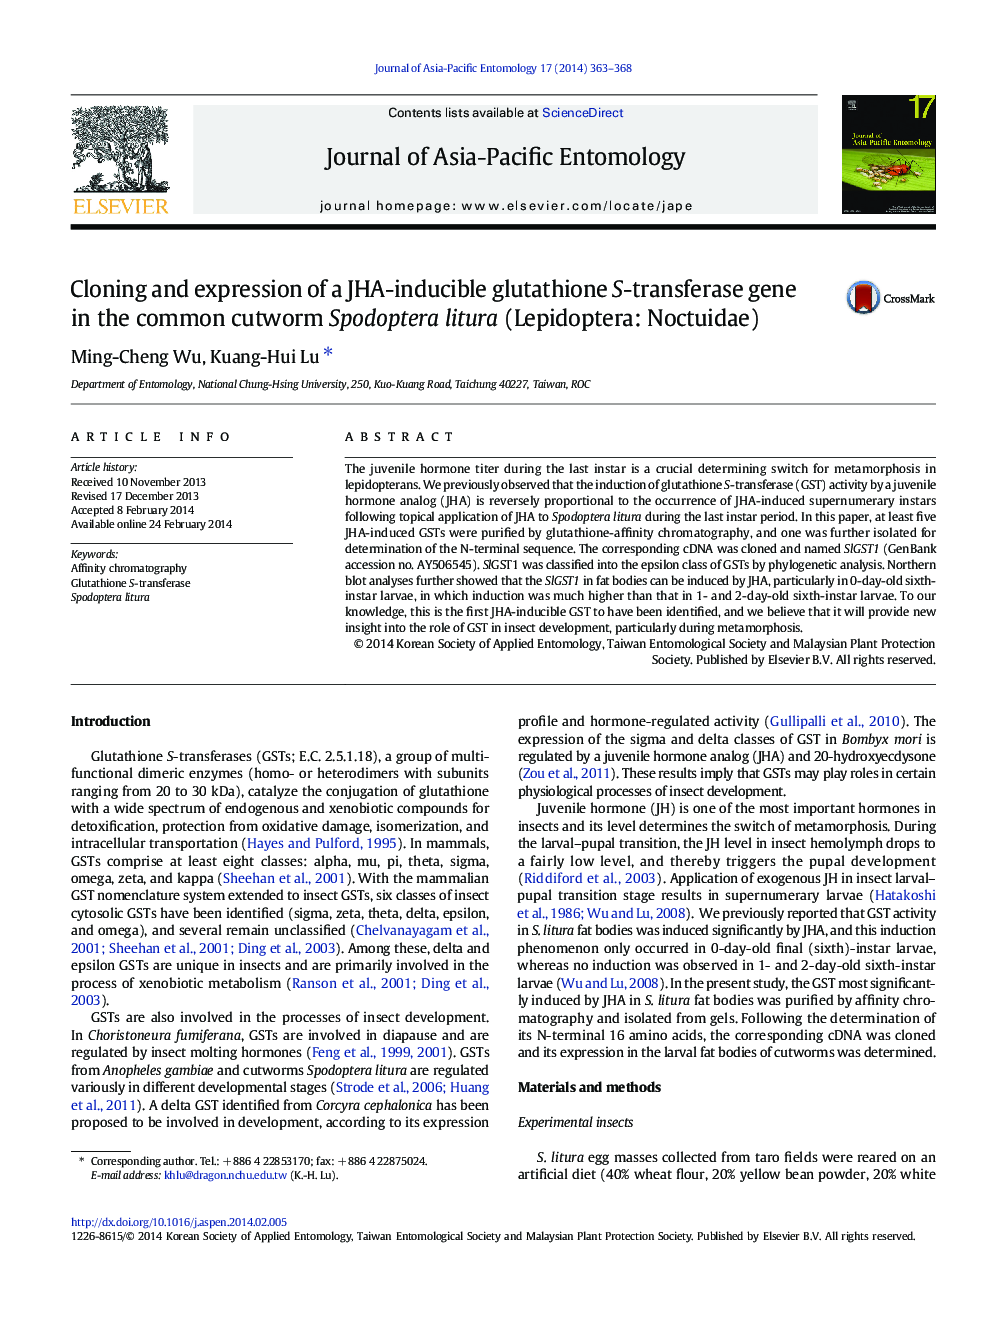 Cloning and expression of a JHA-inducible glutathione S-transferase gene in the common cutworm Spodoptera litura (Lepidoptera: Noctuidae)